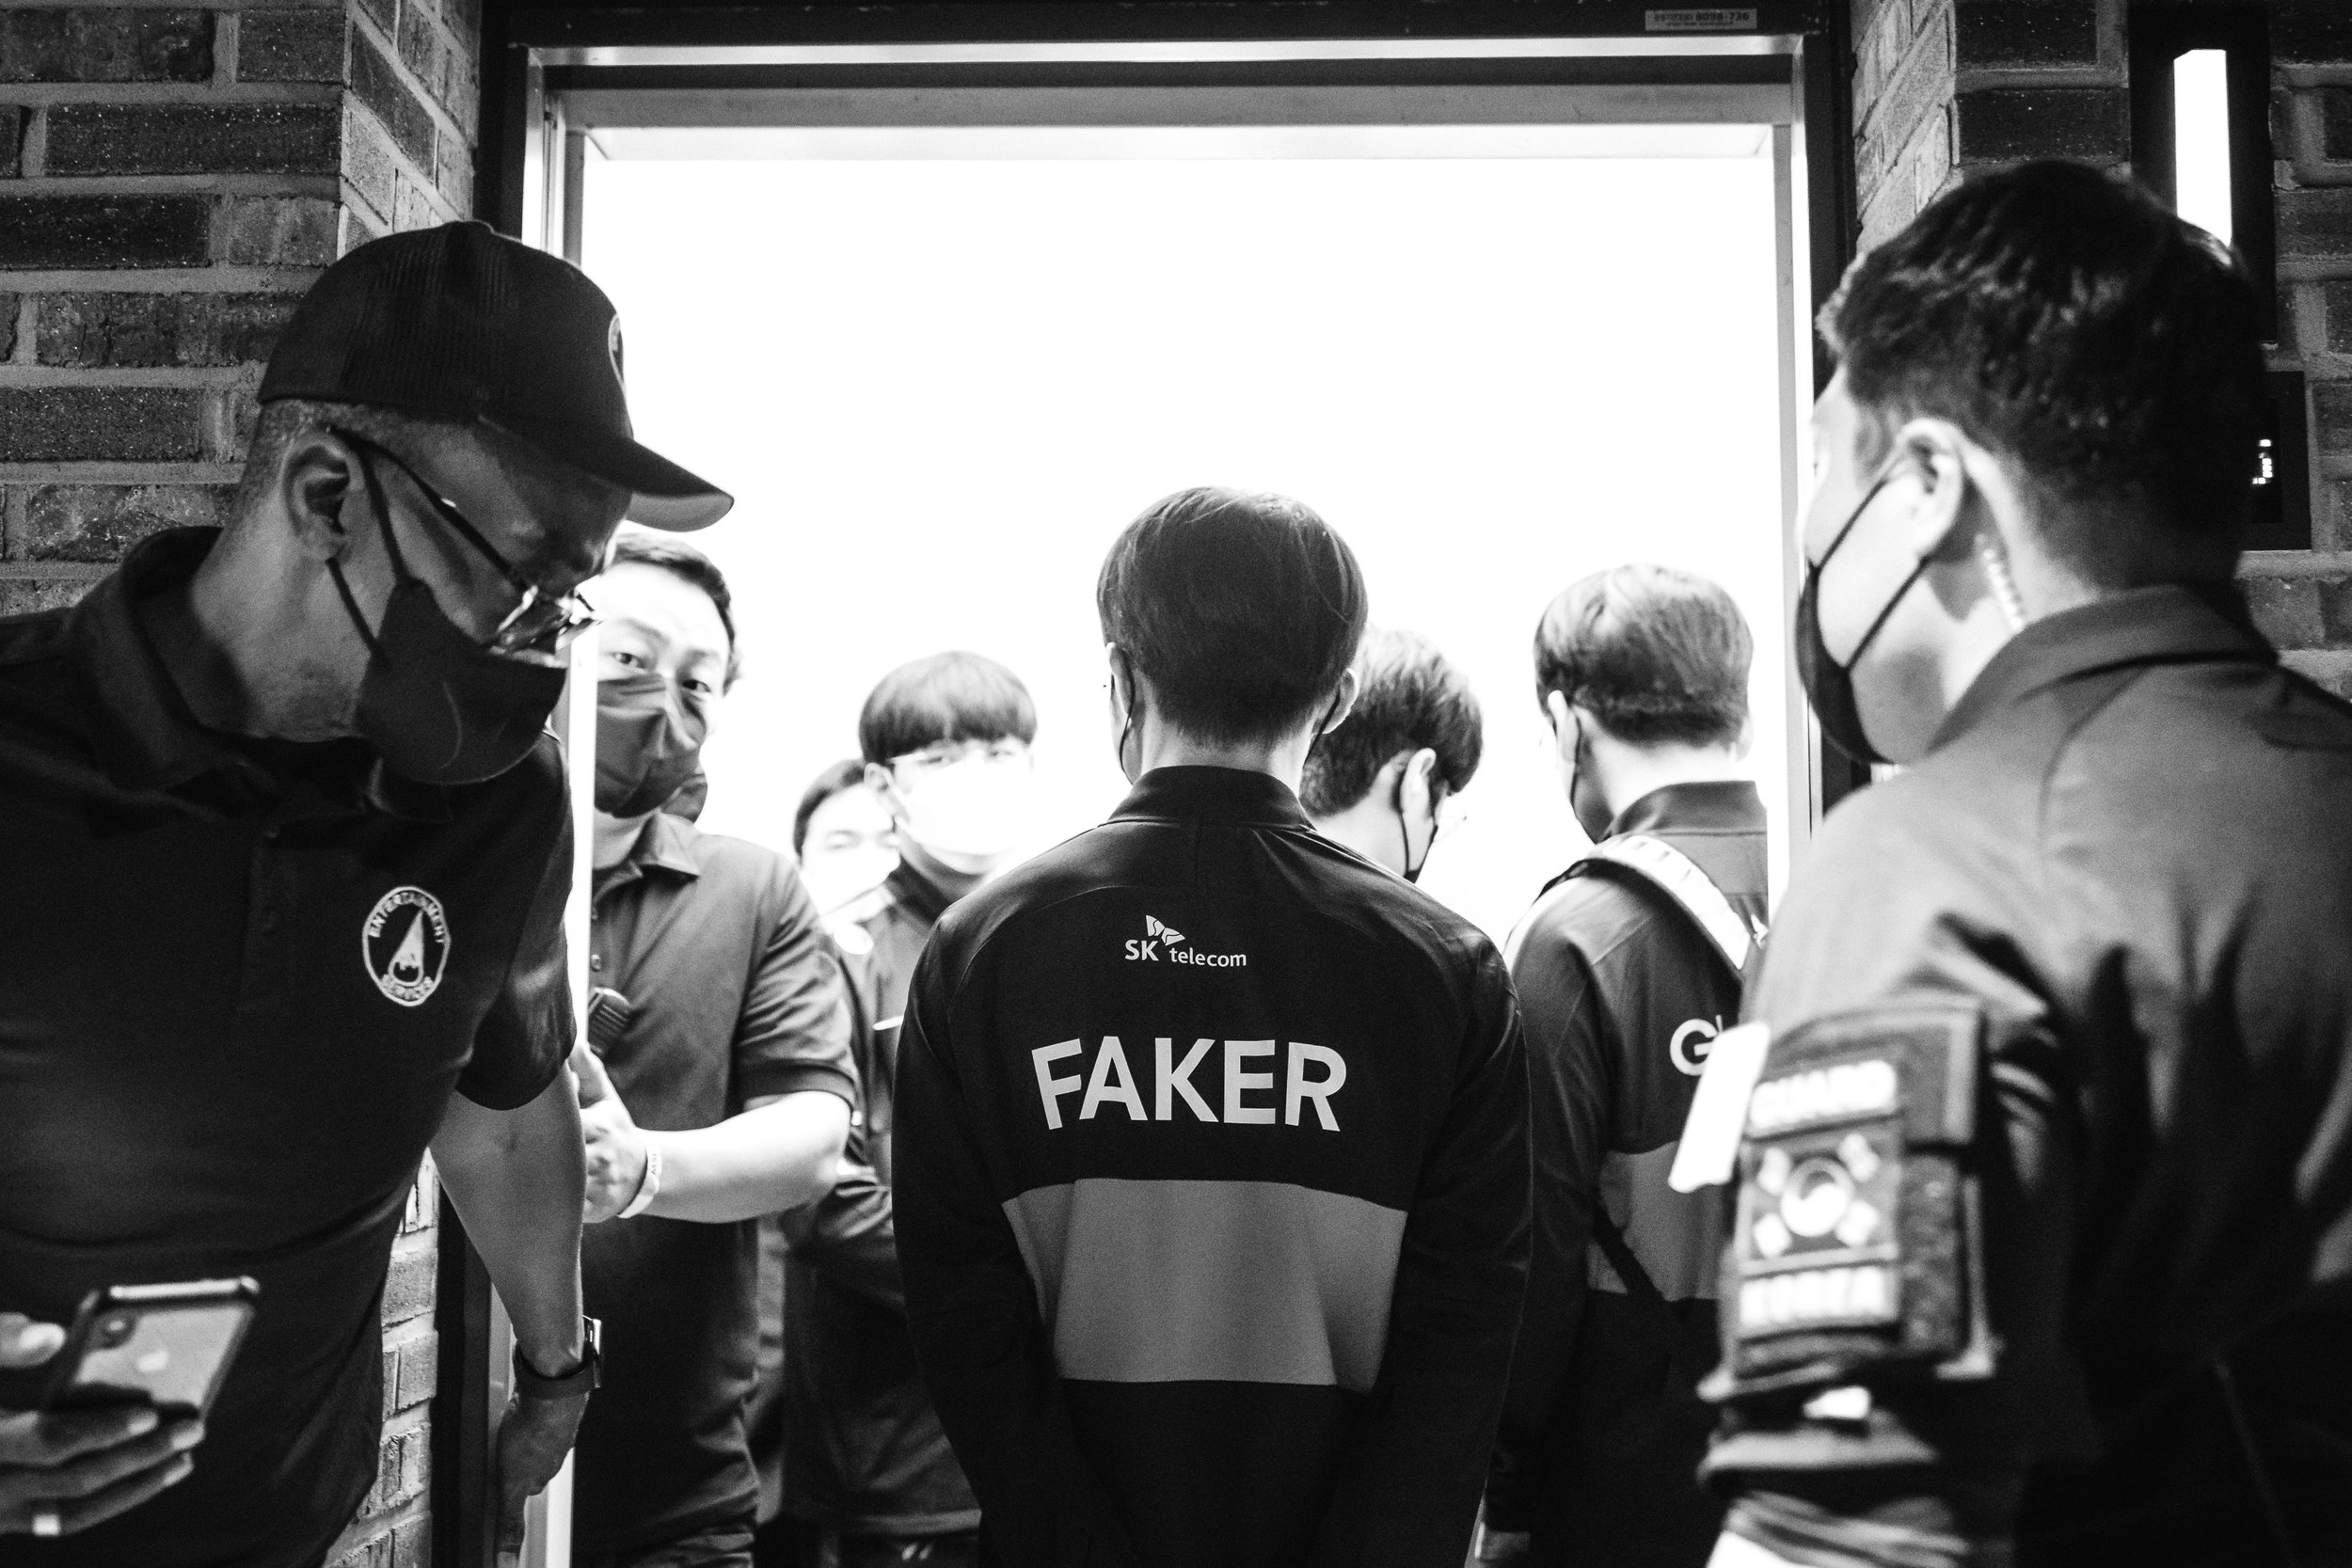 Back view of T1 Faker